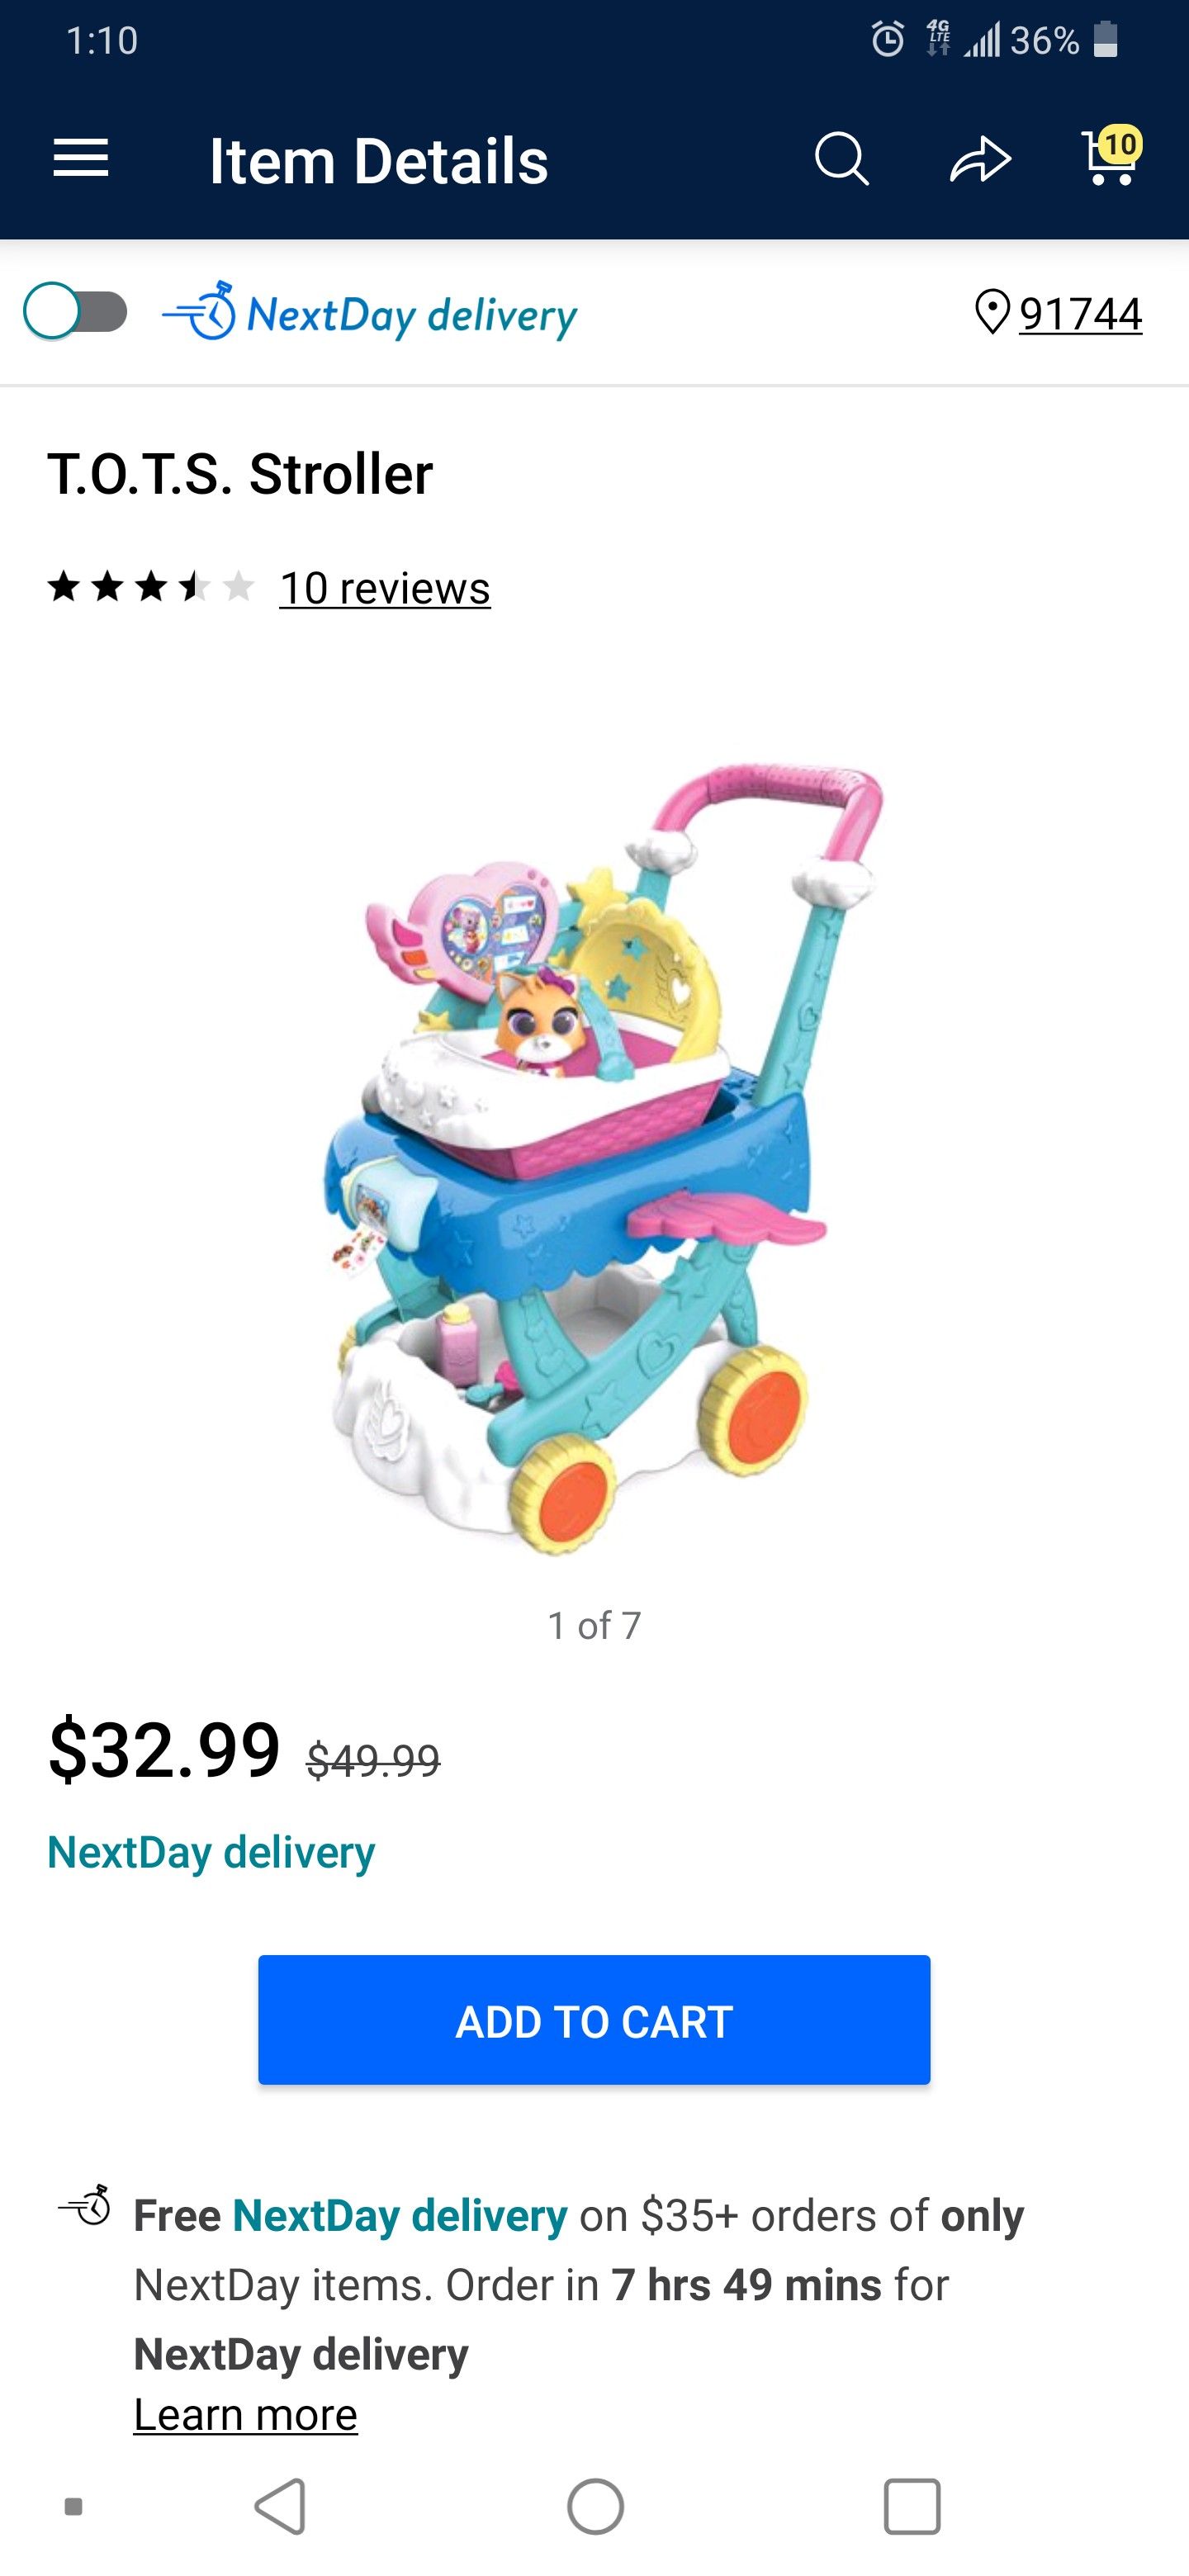 Stroller Toy T.O.T.S.